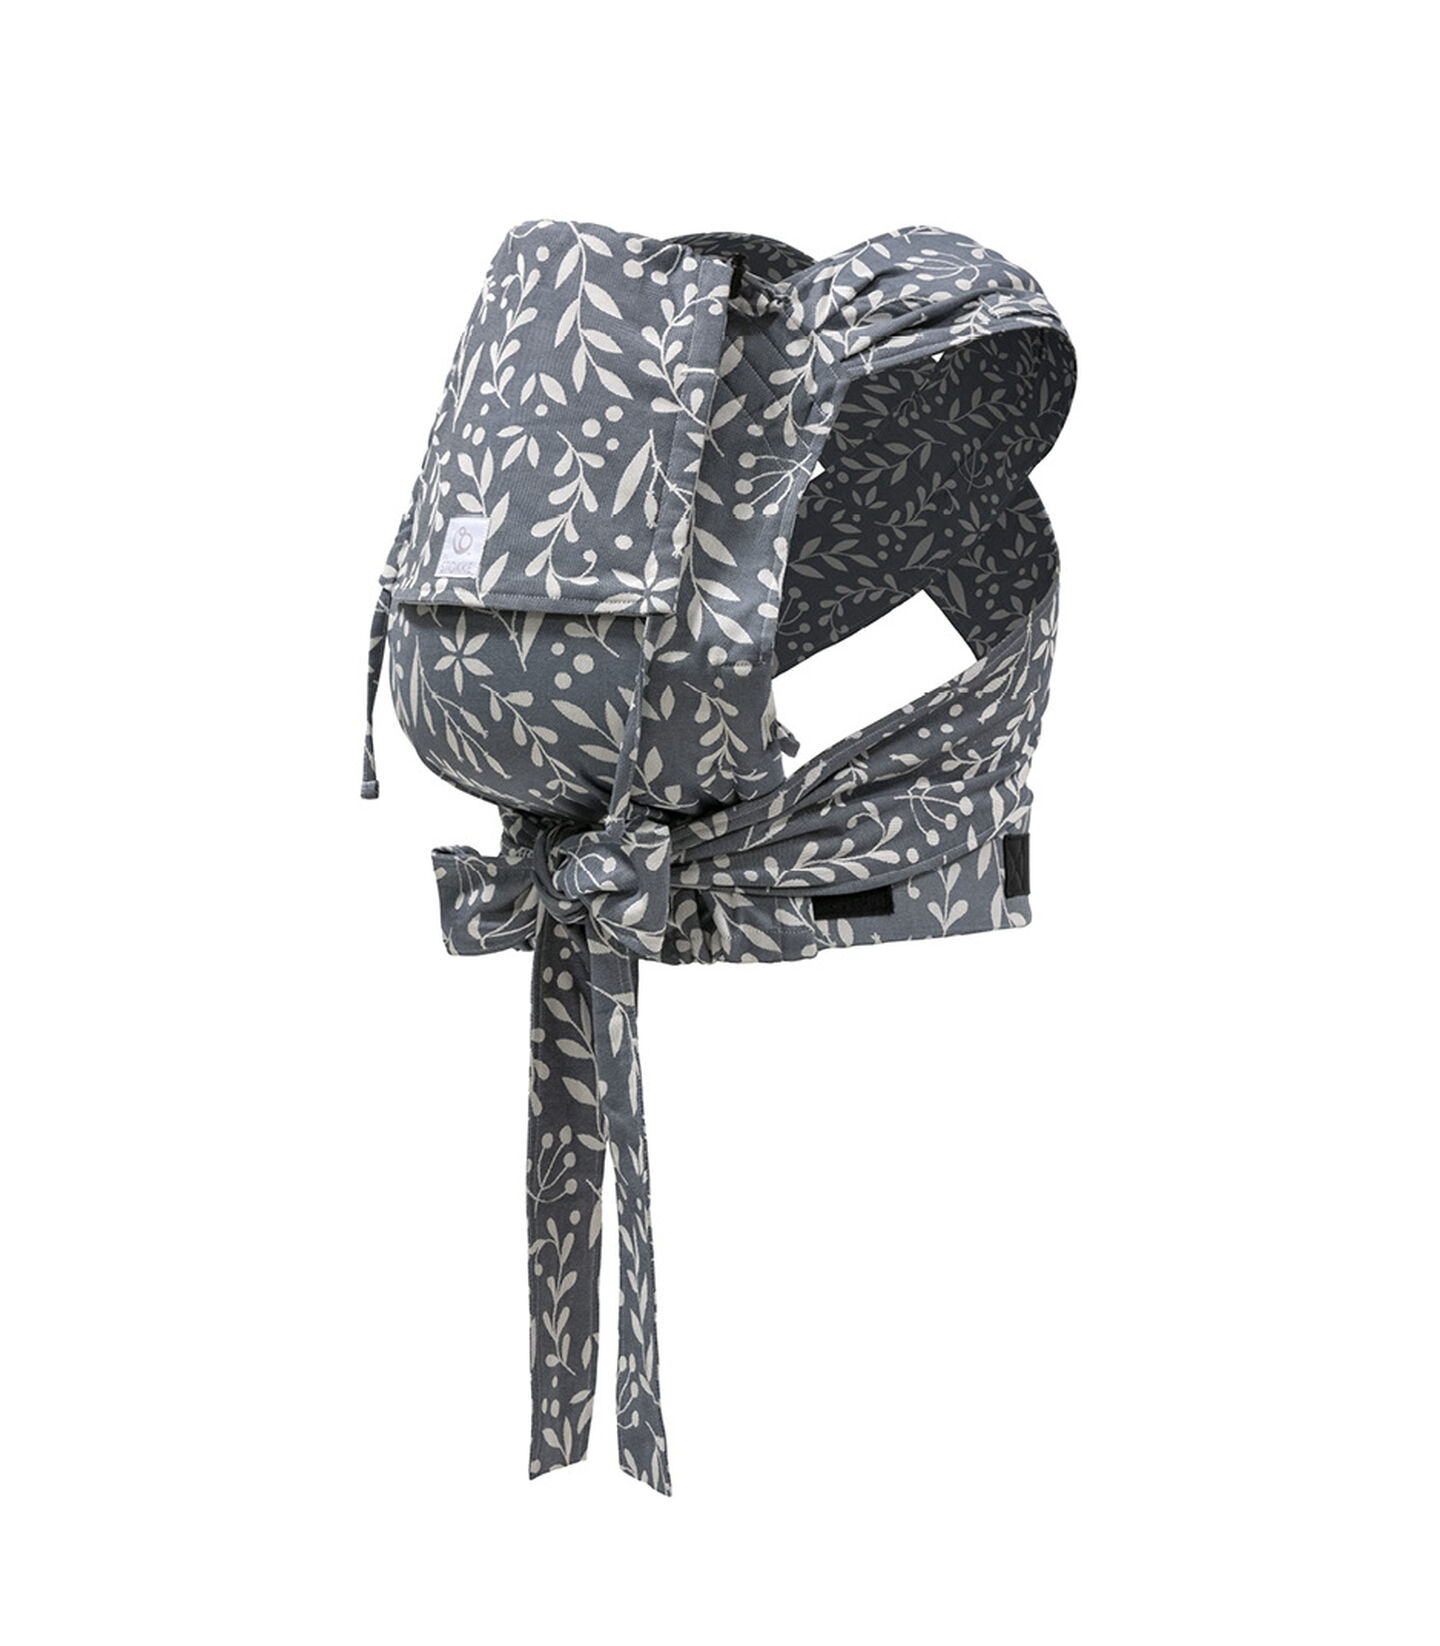 Stokke® Limas™ babydrager Floral Slate, Floral Slate, mainview view 1